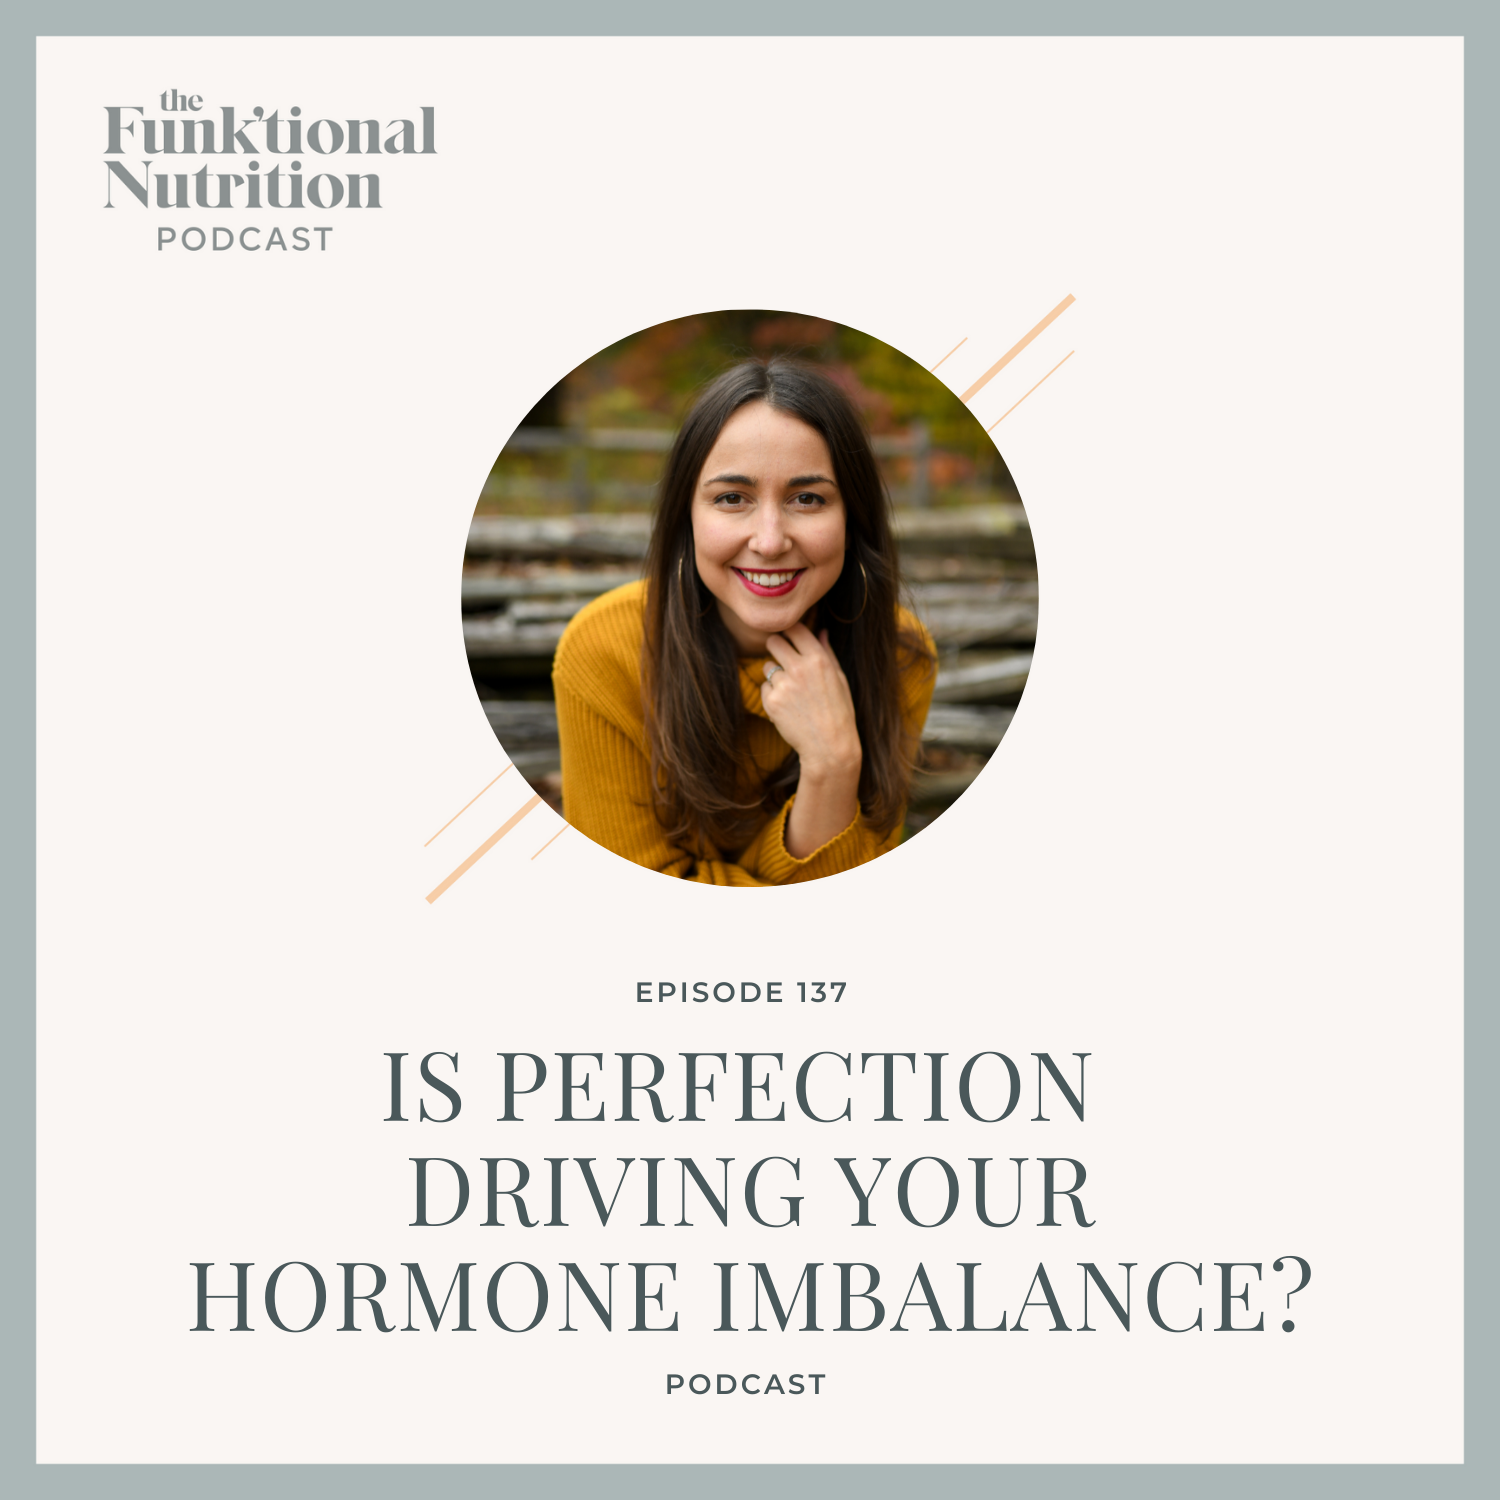 Episode-137-Is-Perfectionism-Driving-Your-Hormonal-Imbalance-Cortisol-DHEA-Adrenal-Testing-The-Funk_tional-Nutrition-Podcast.png